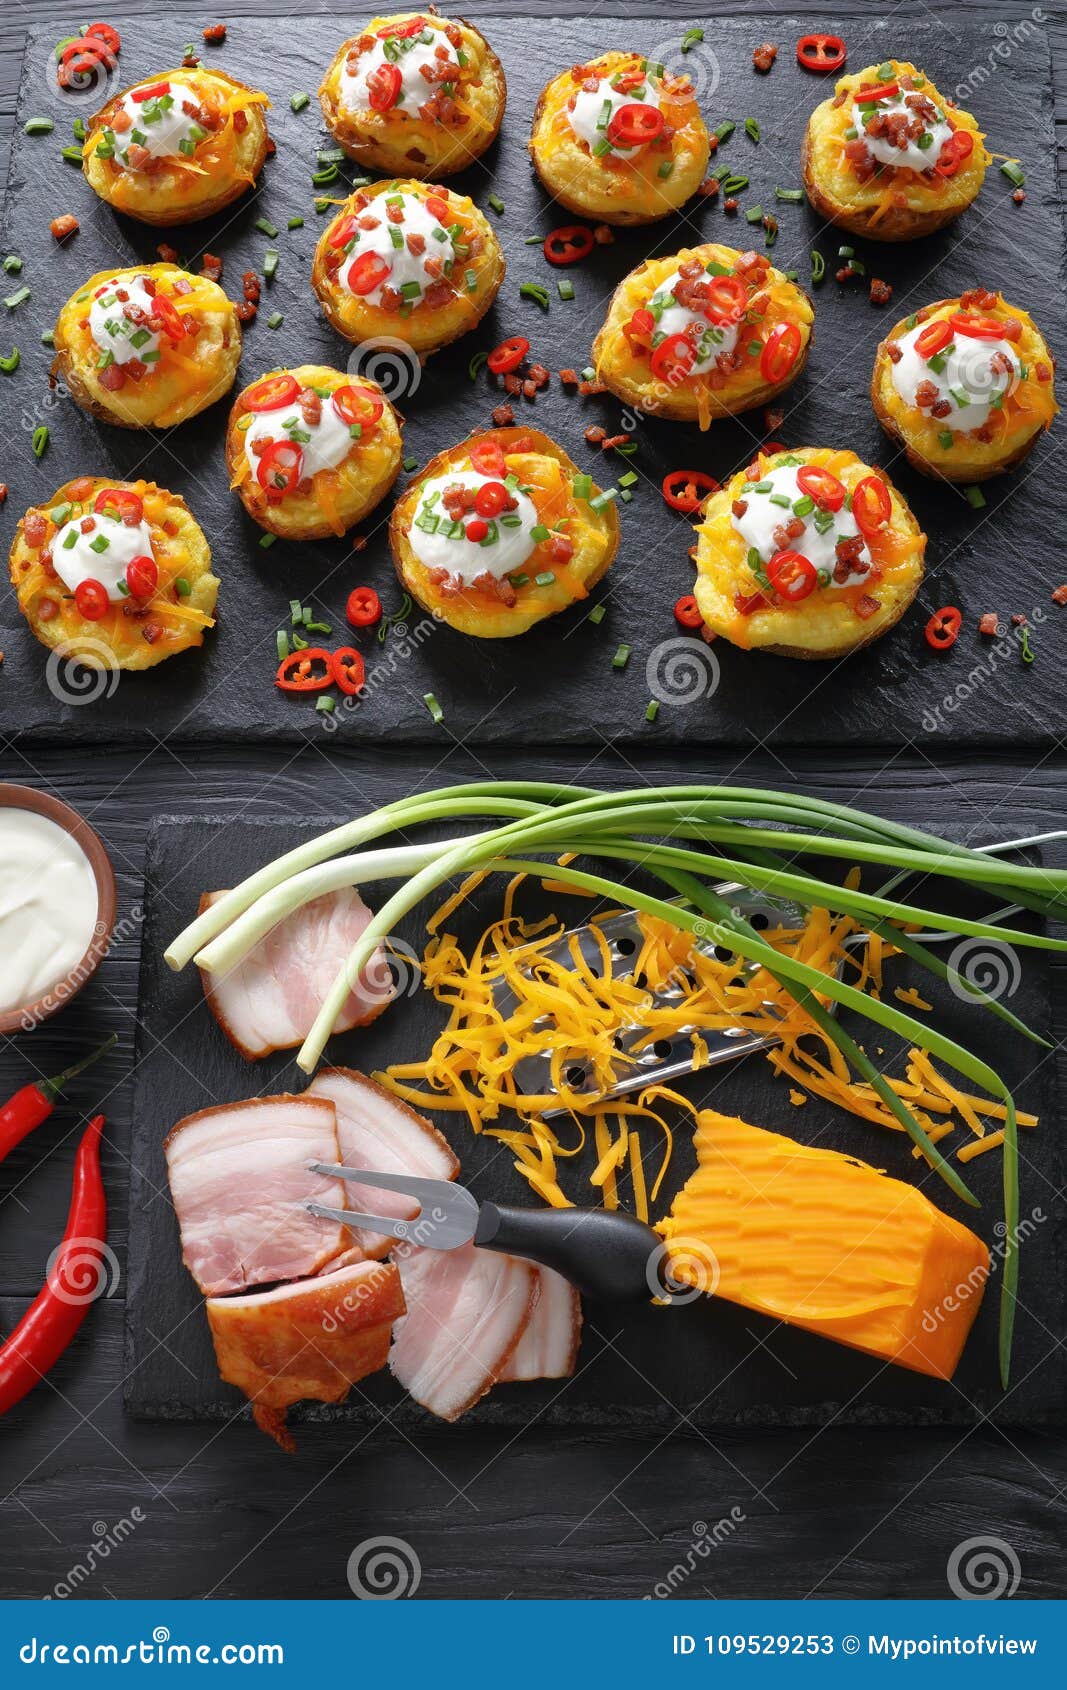 Tasty Loaded Potatoes Halves, Top View Stock Image - Image of cooked ...